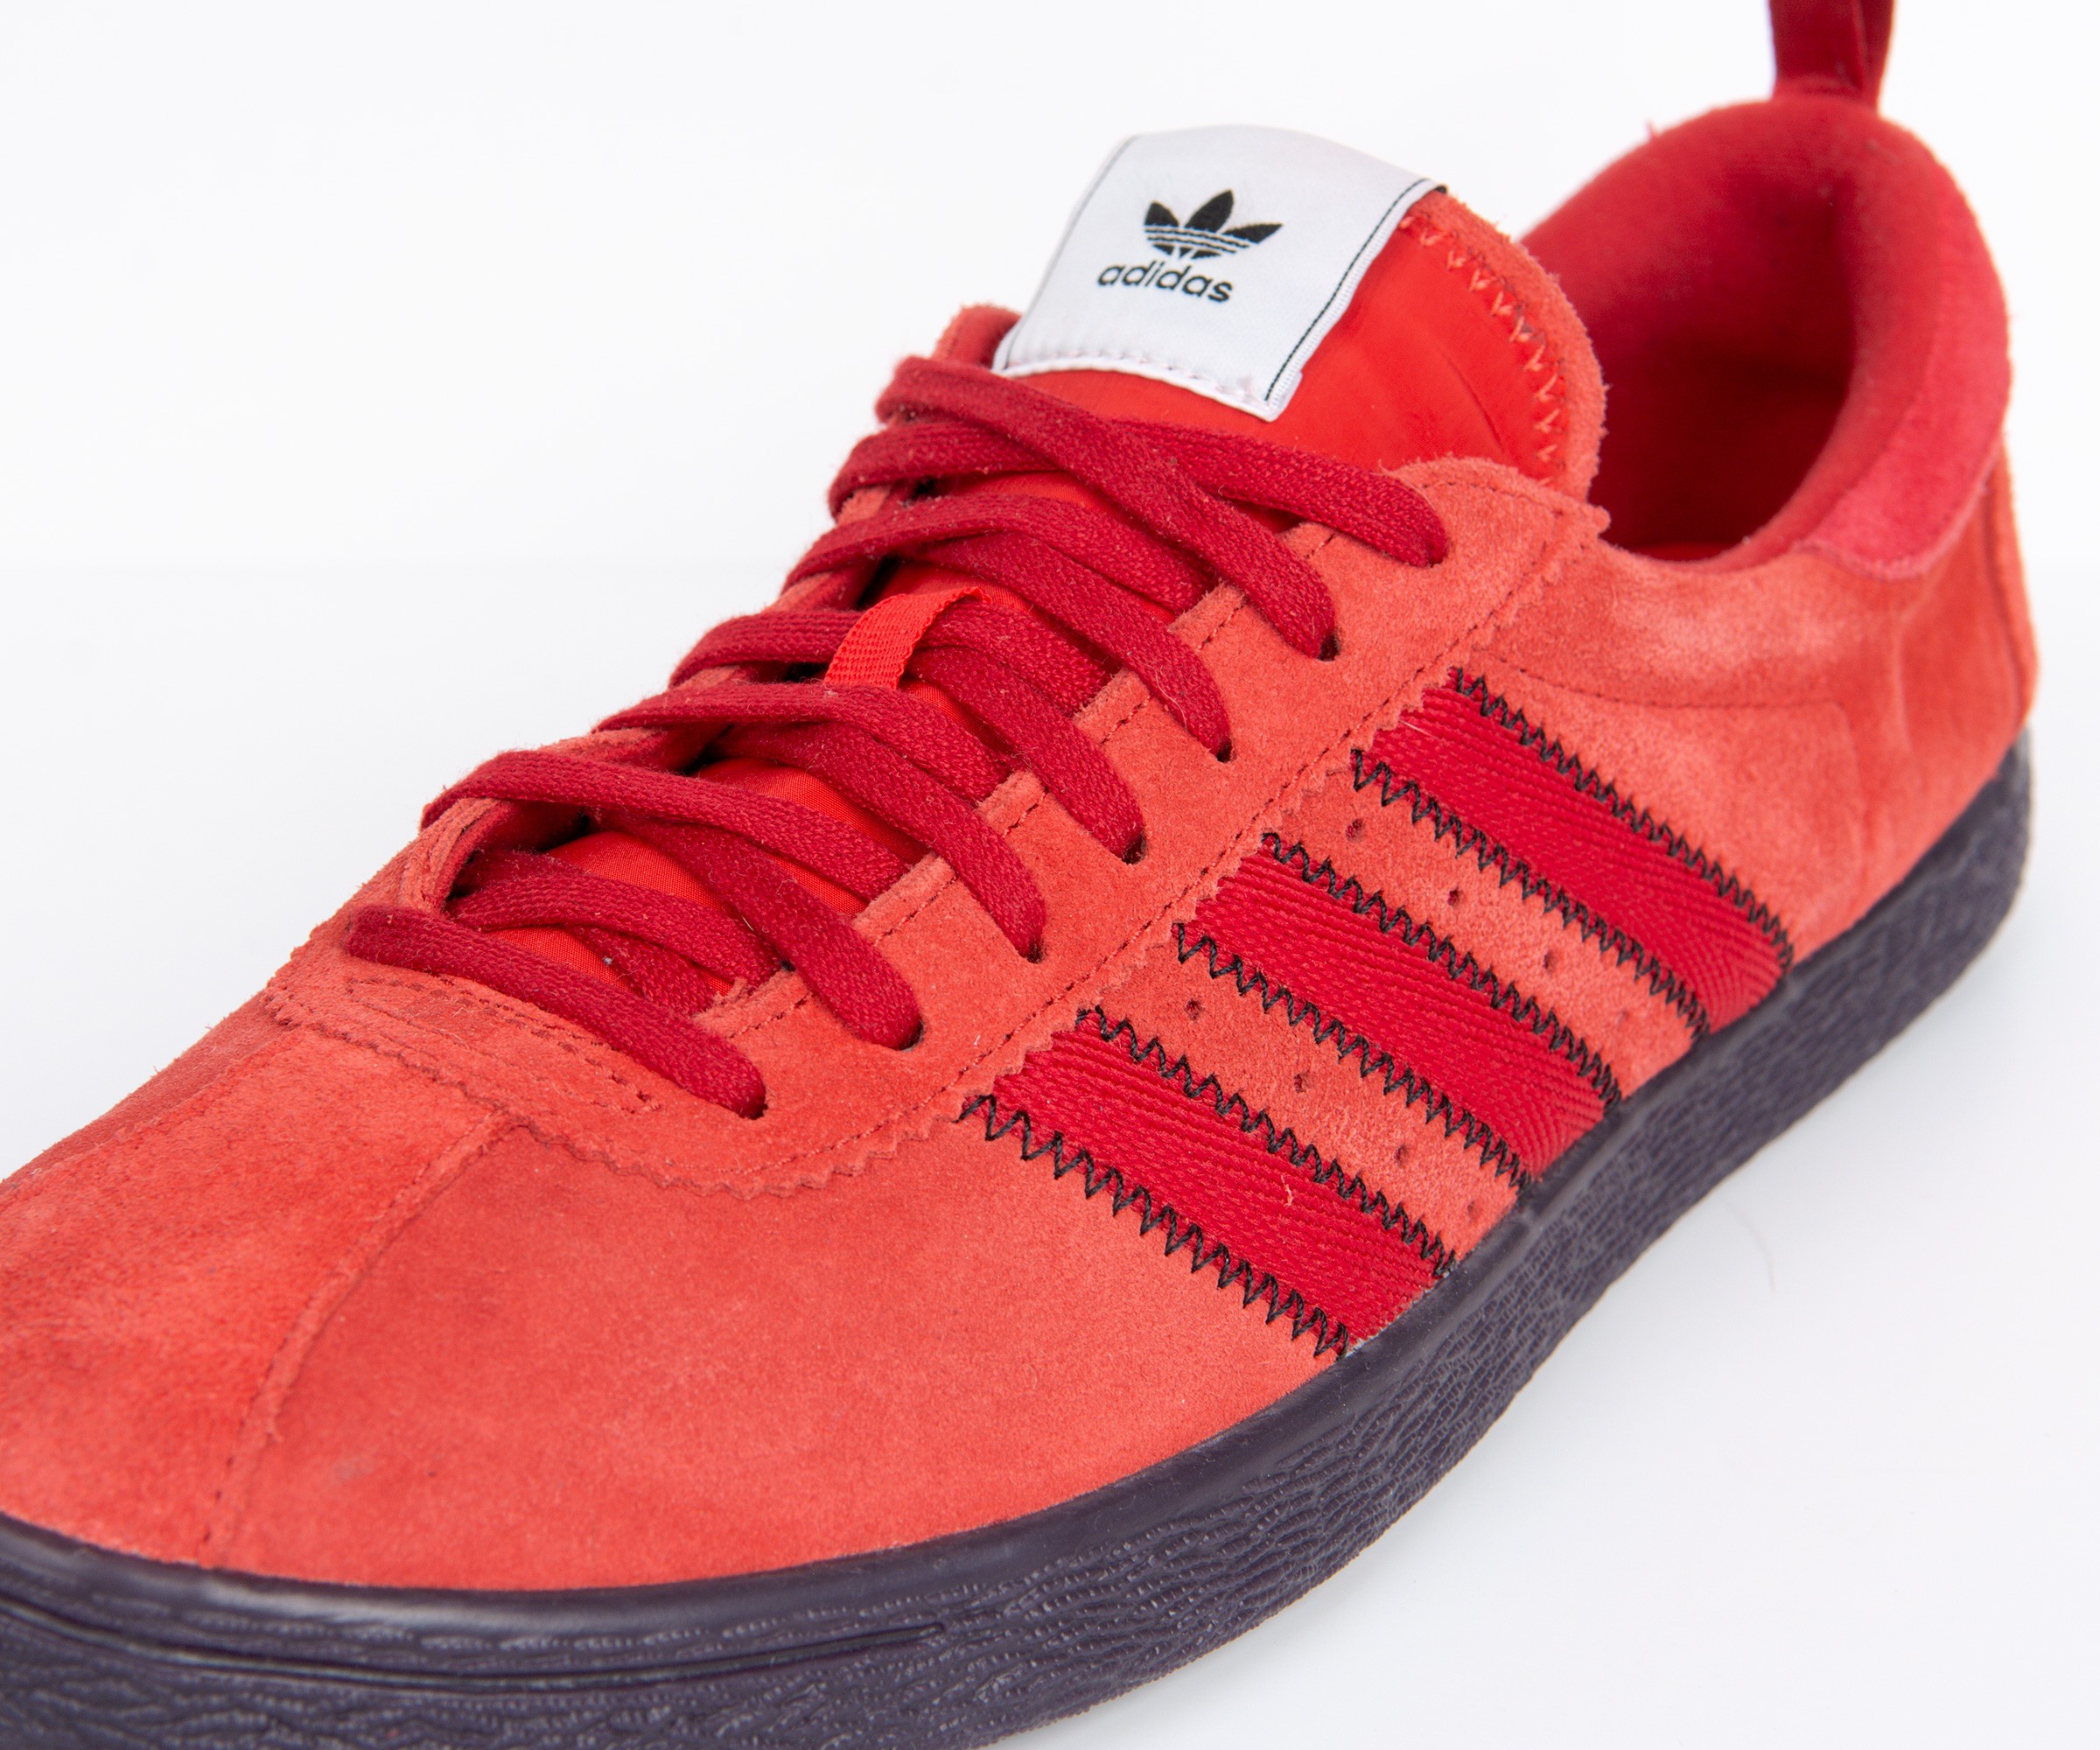 Archive x ADIDAS Tobacco - ST Brick/Night Red/Surf Red